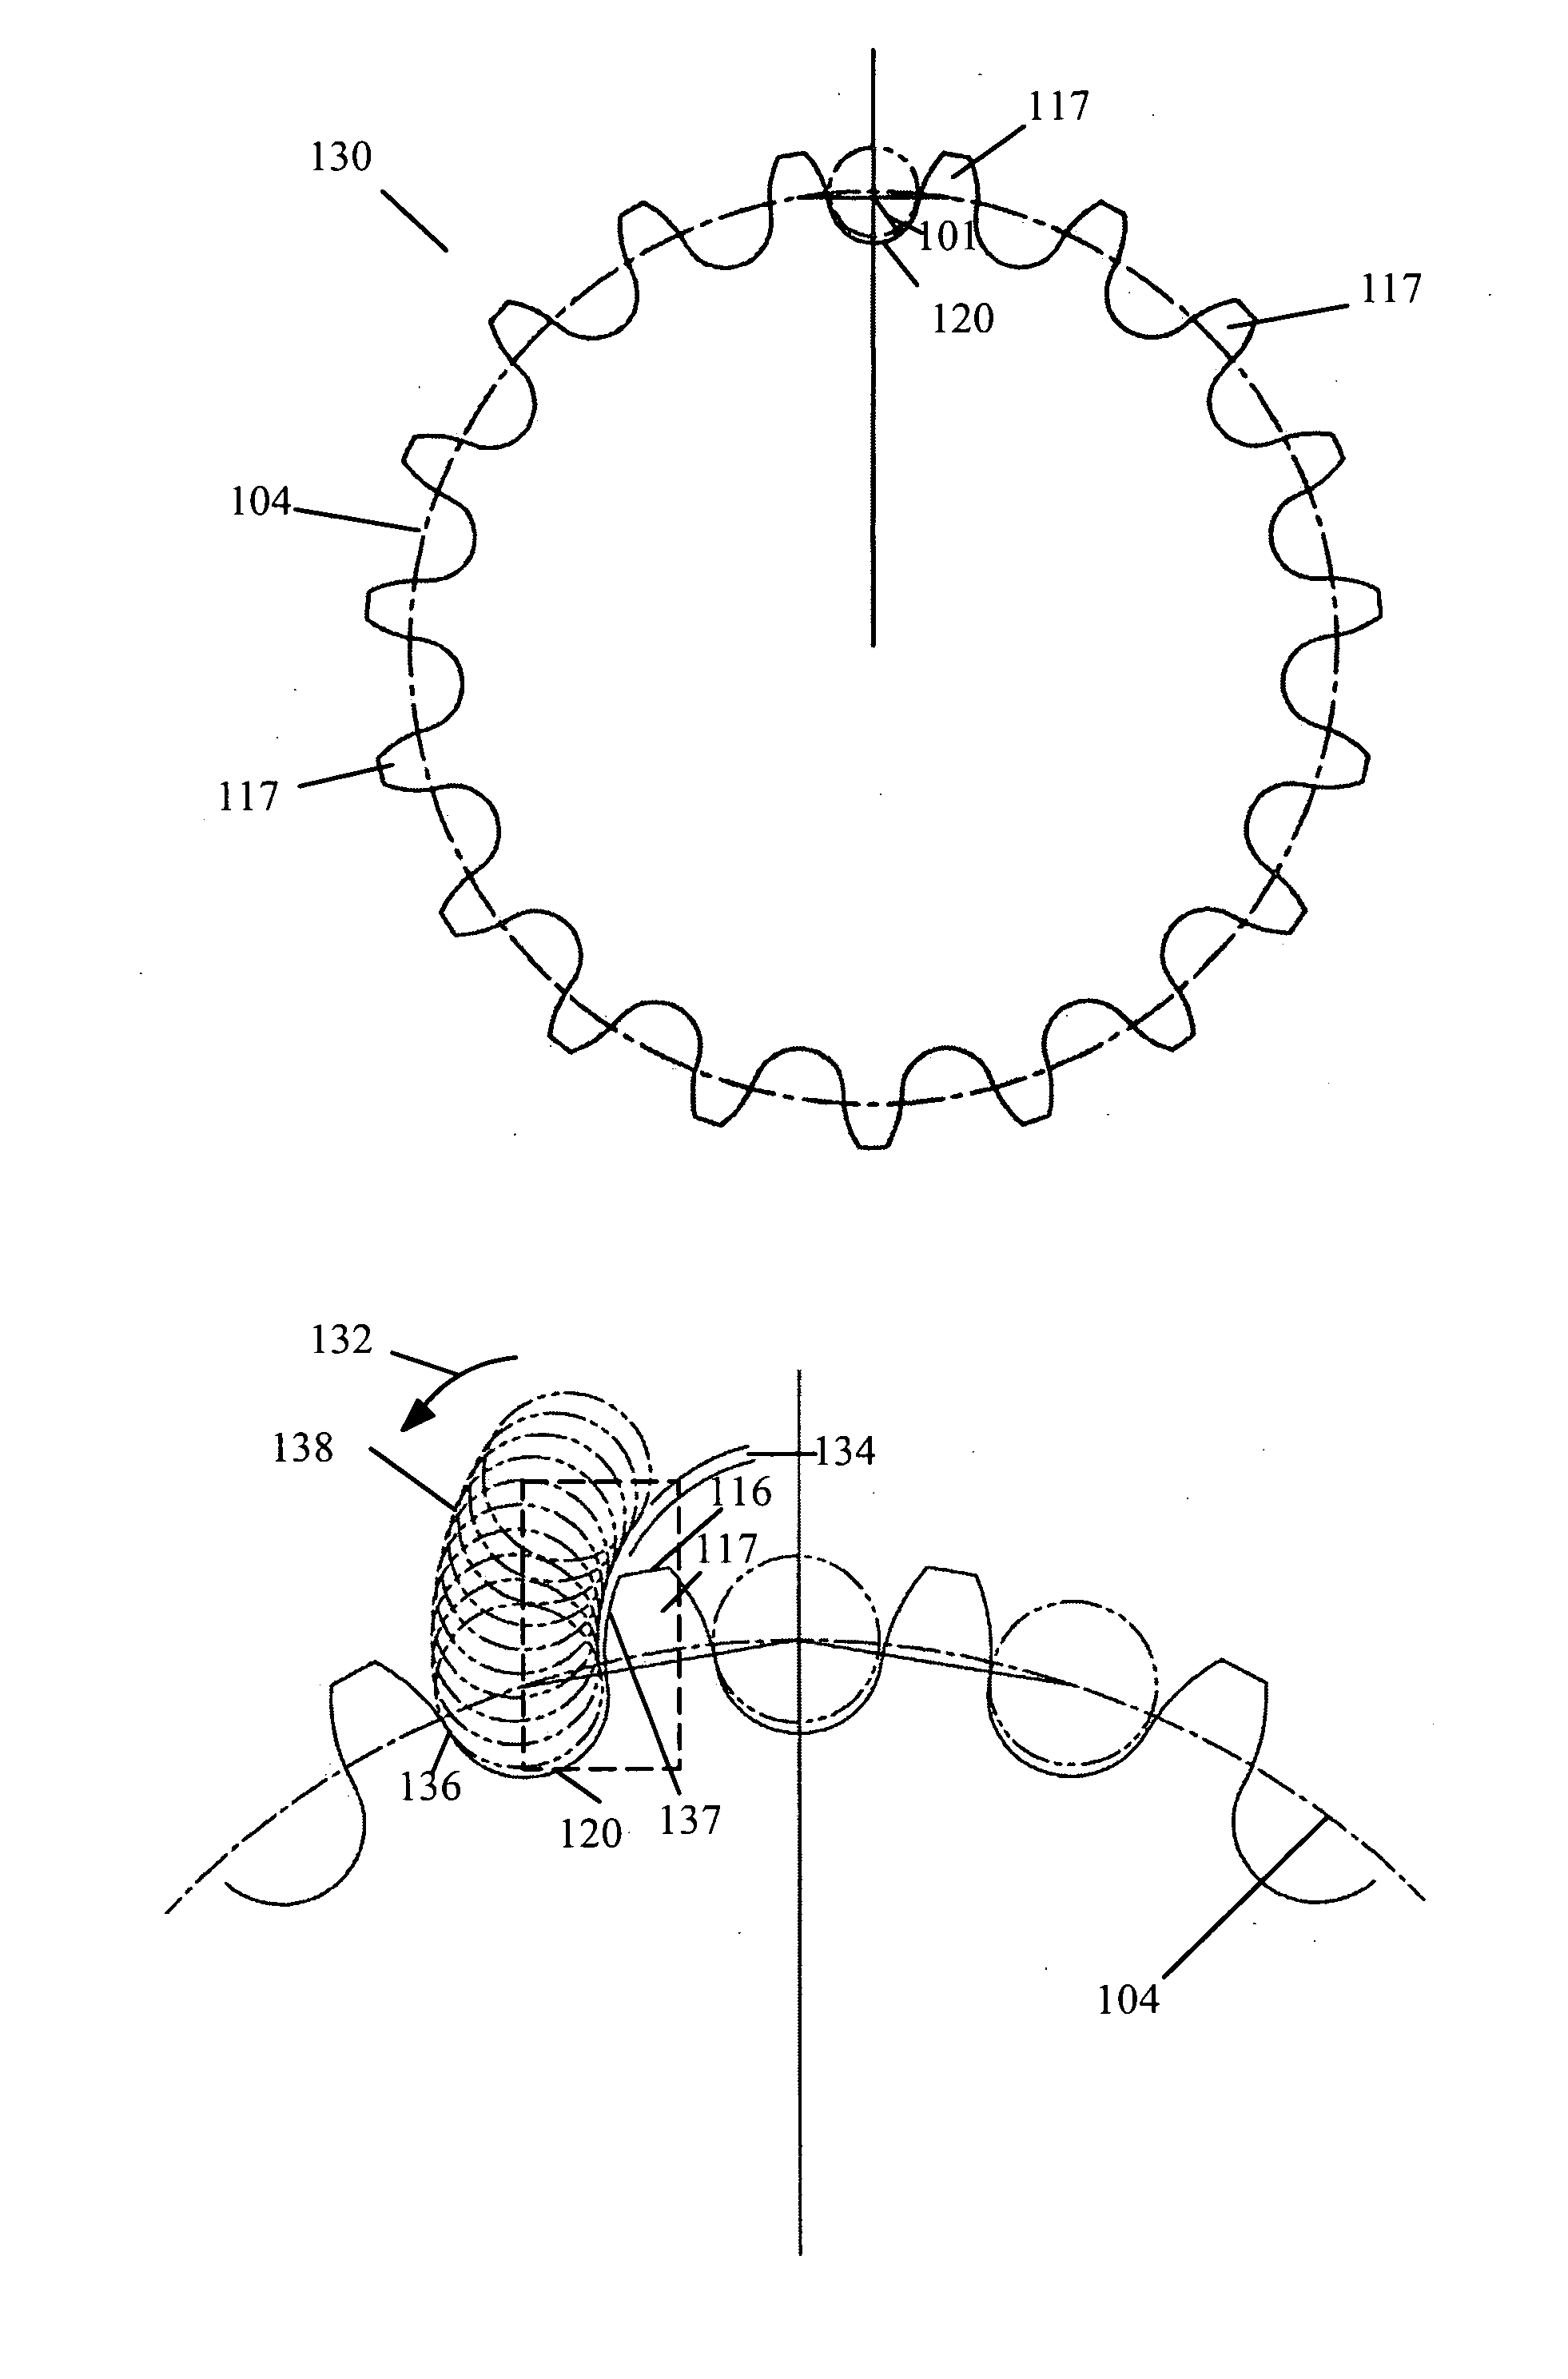 Sprocket tooth profile for a roller or bush chain